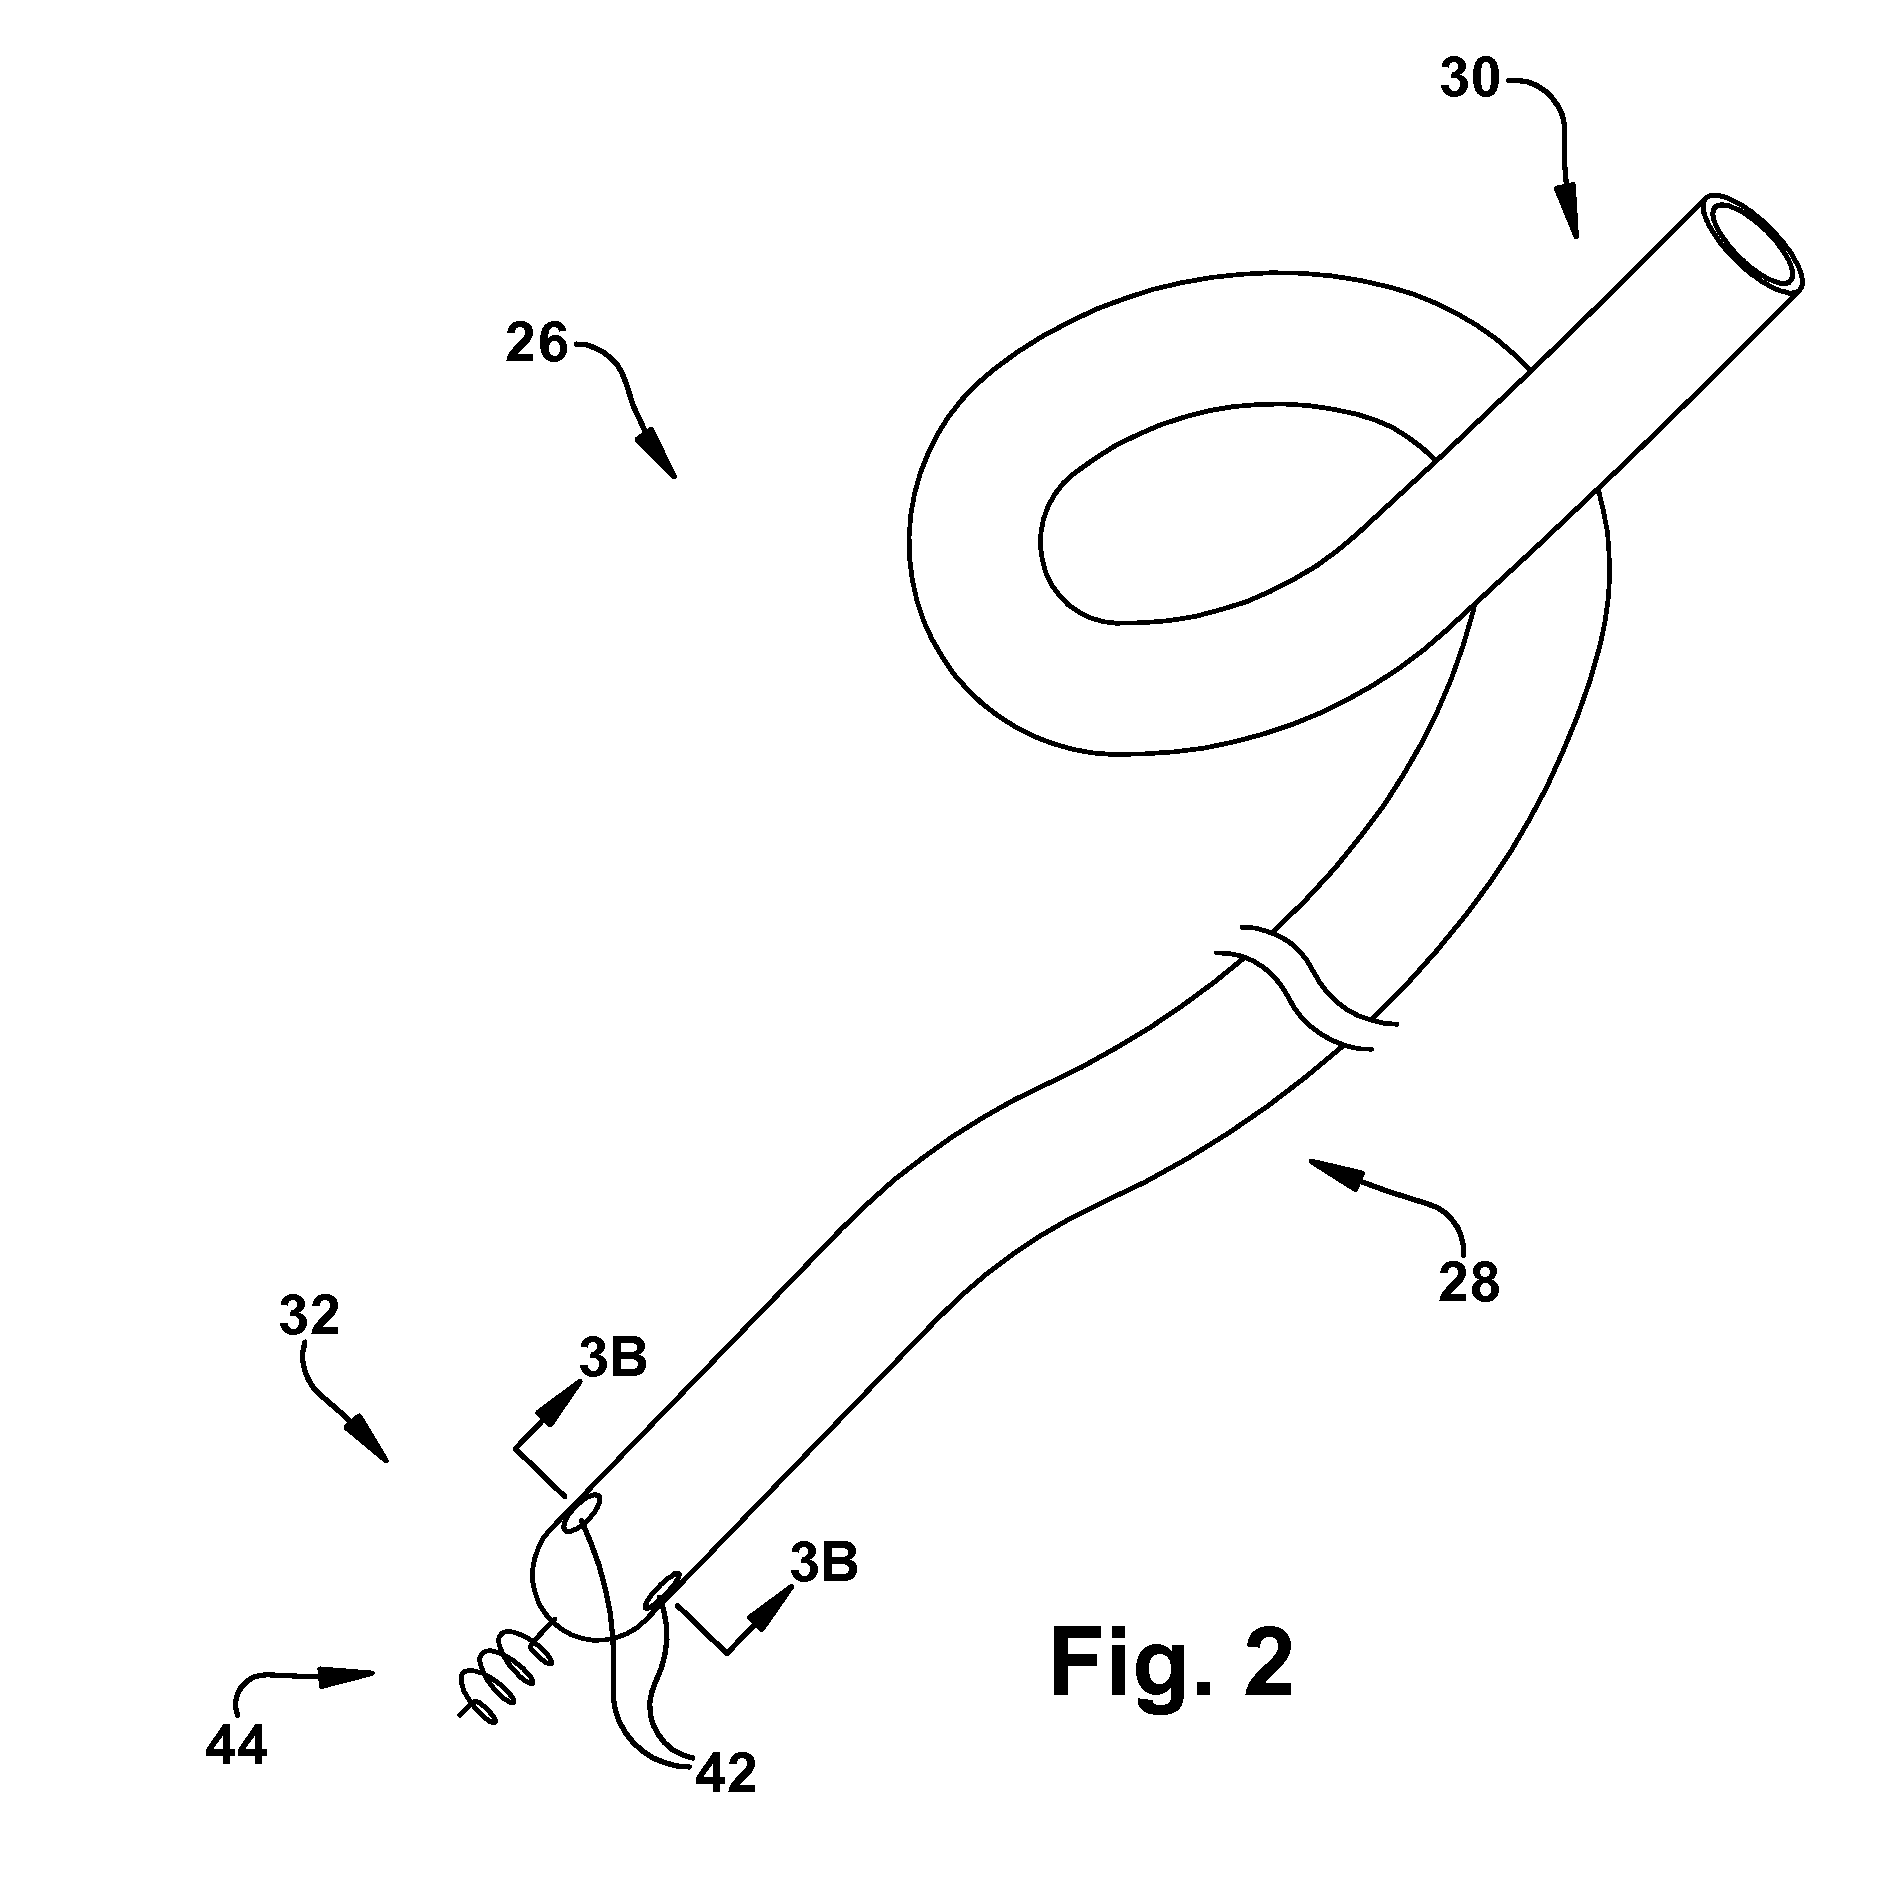 Method for increasing blood flow in or about a cardiac or other vascular or prosthetic structure to prevent thrombosis